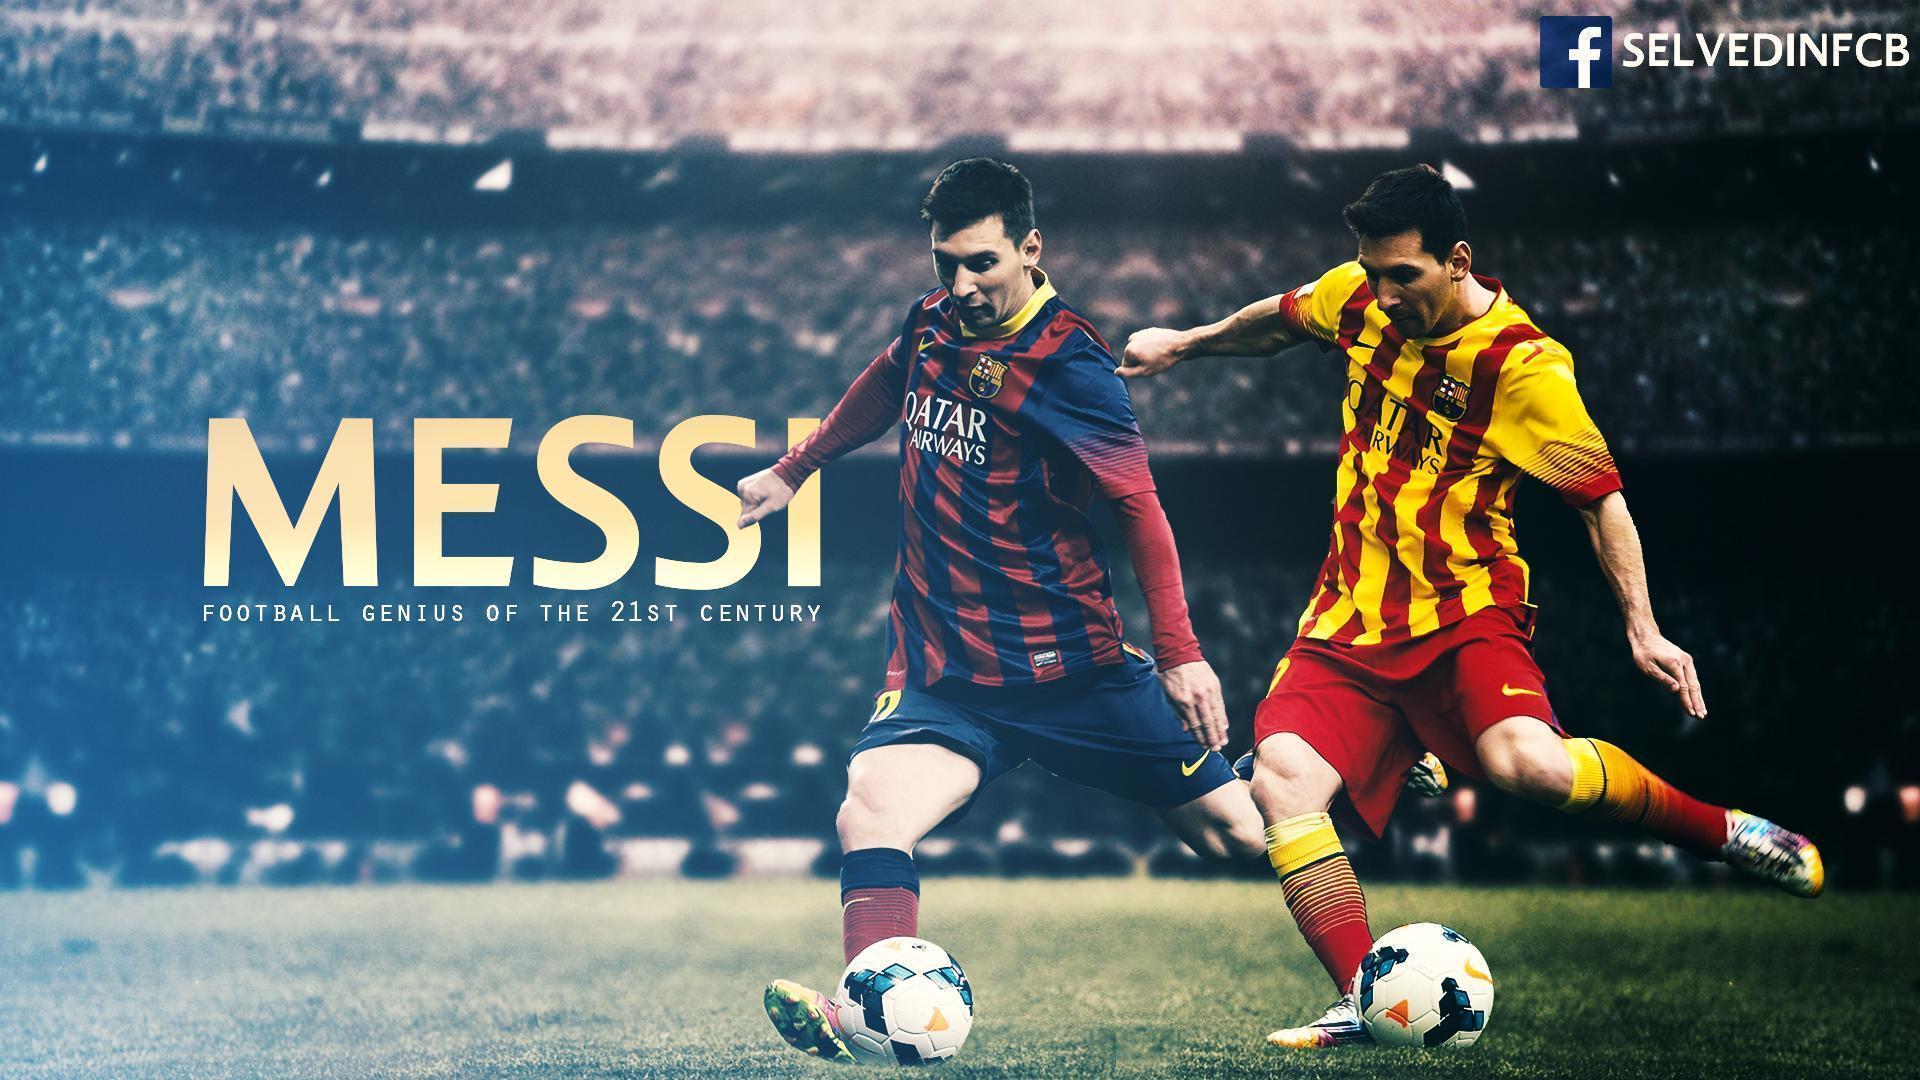 Lionel Messi Wallpapers HD 2015